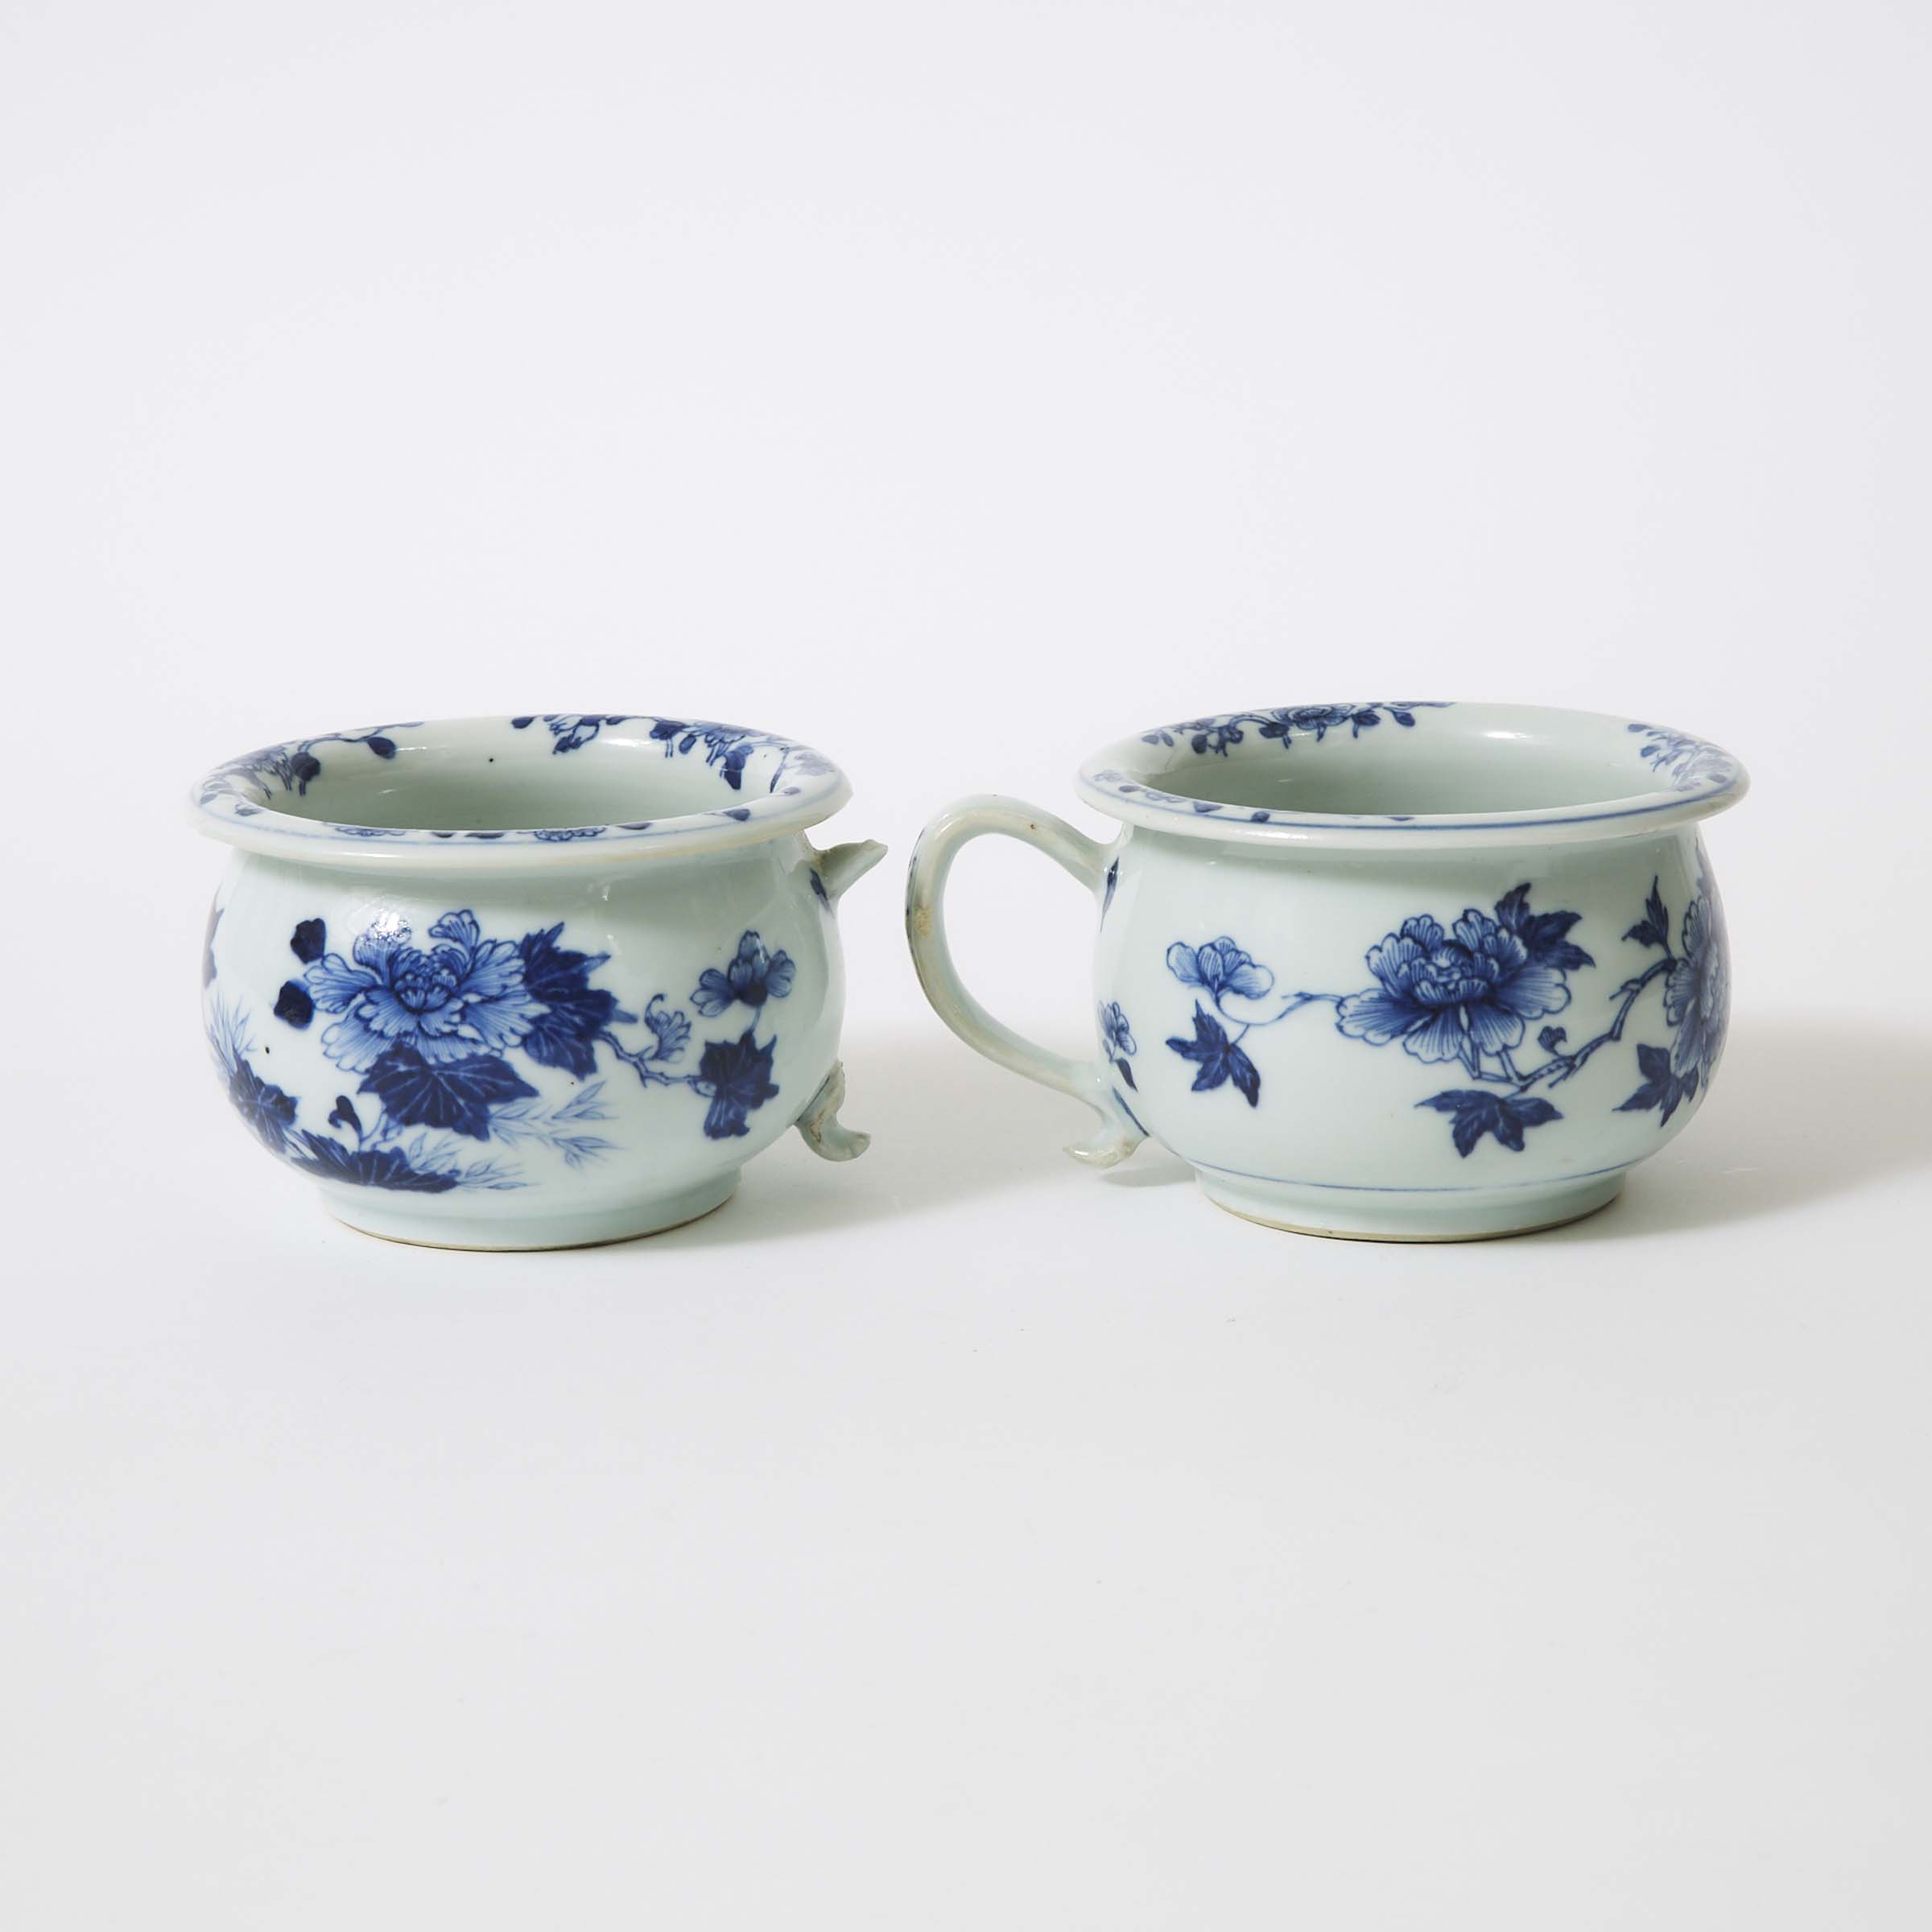 A Pair of Children's Chamber Pots from the Nanking Cargo, Qianlong Period, Circa 1750